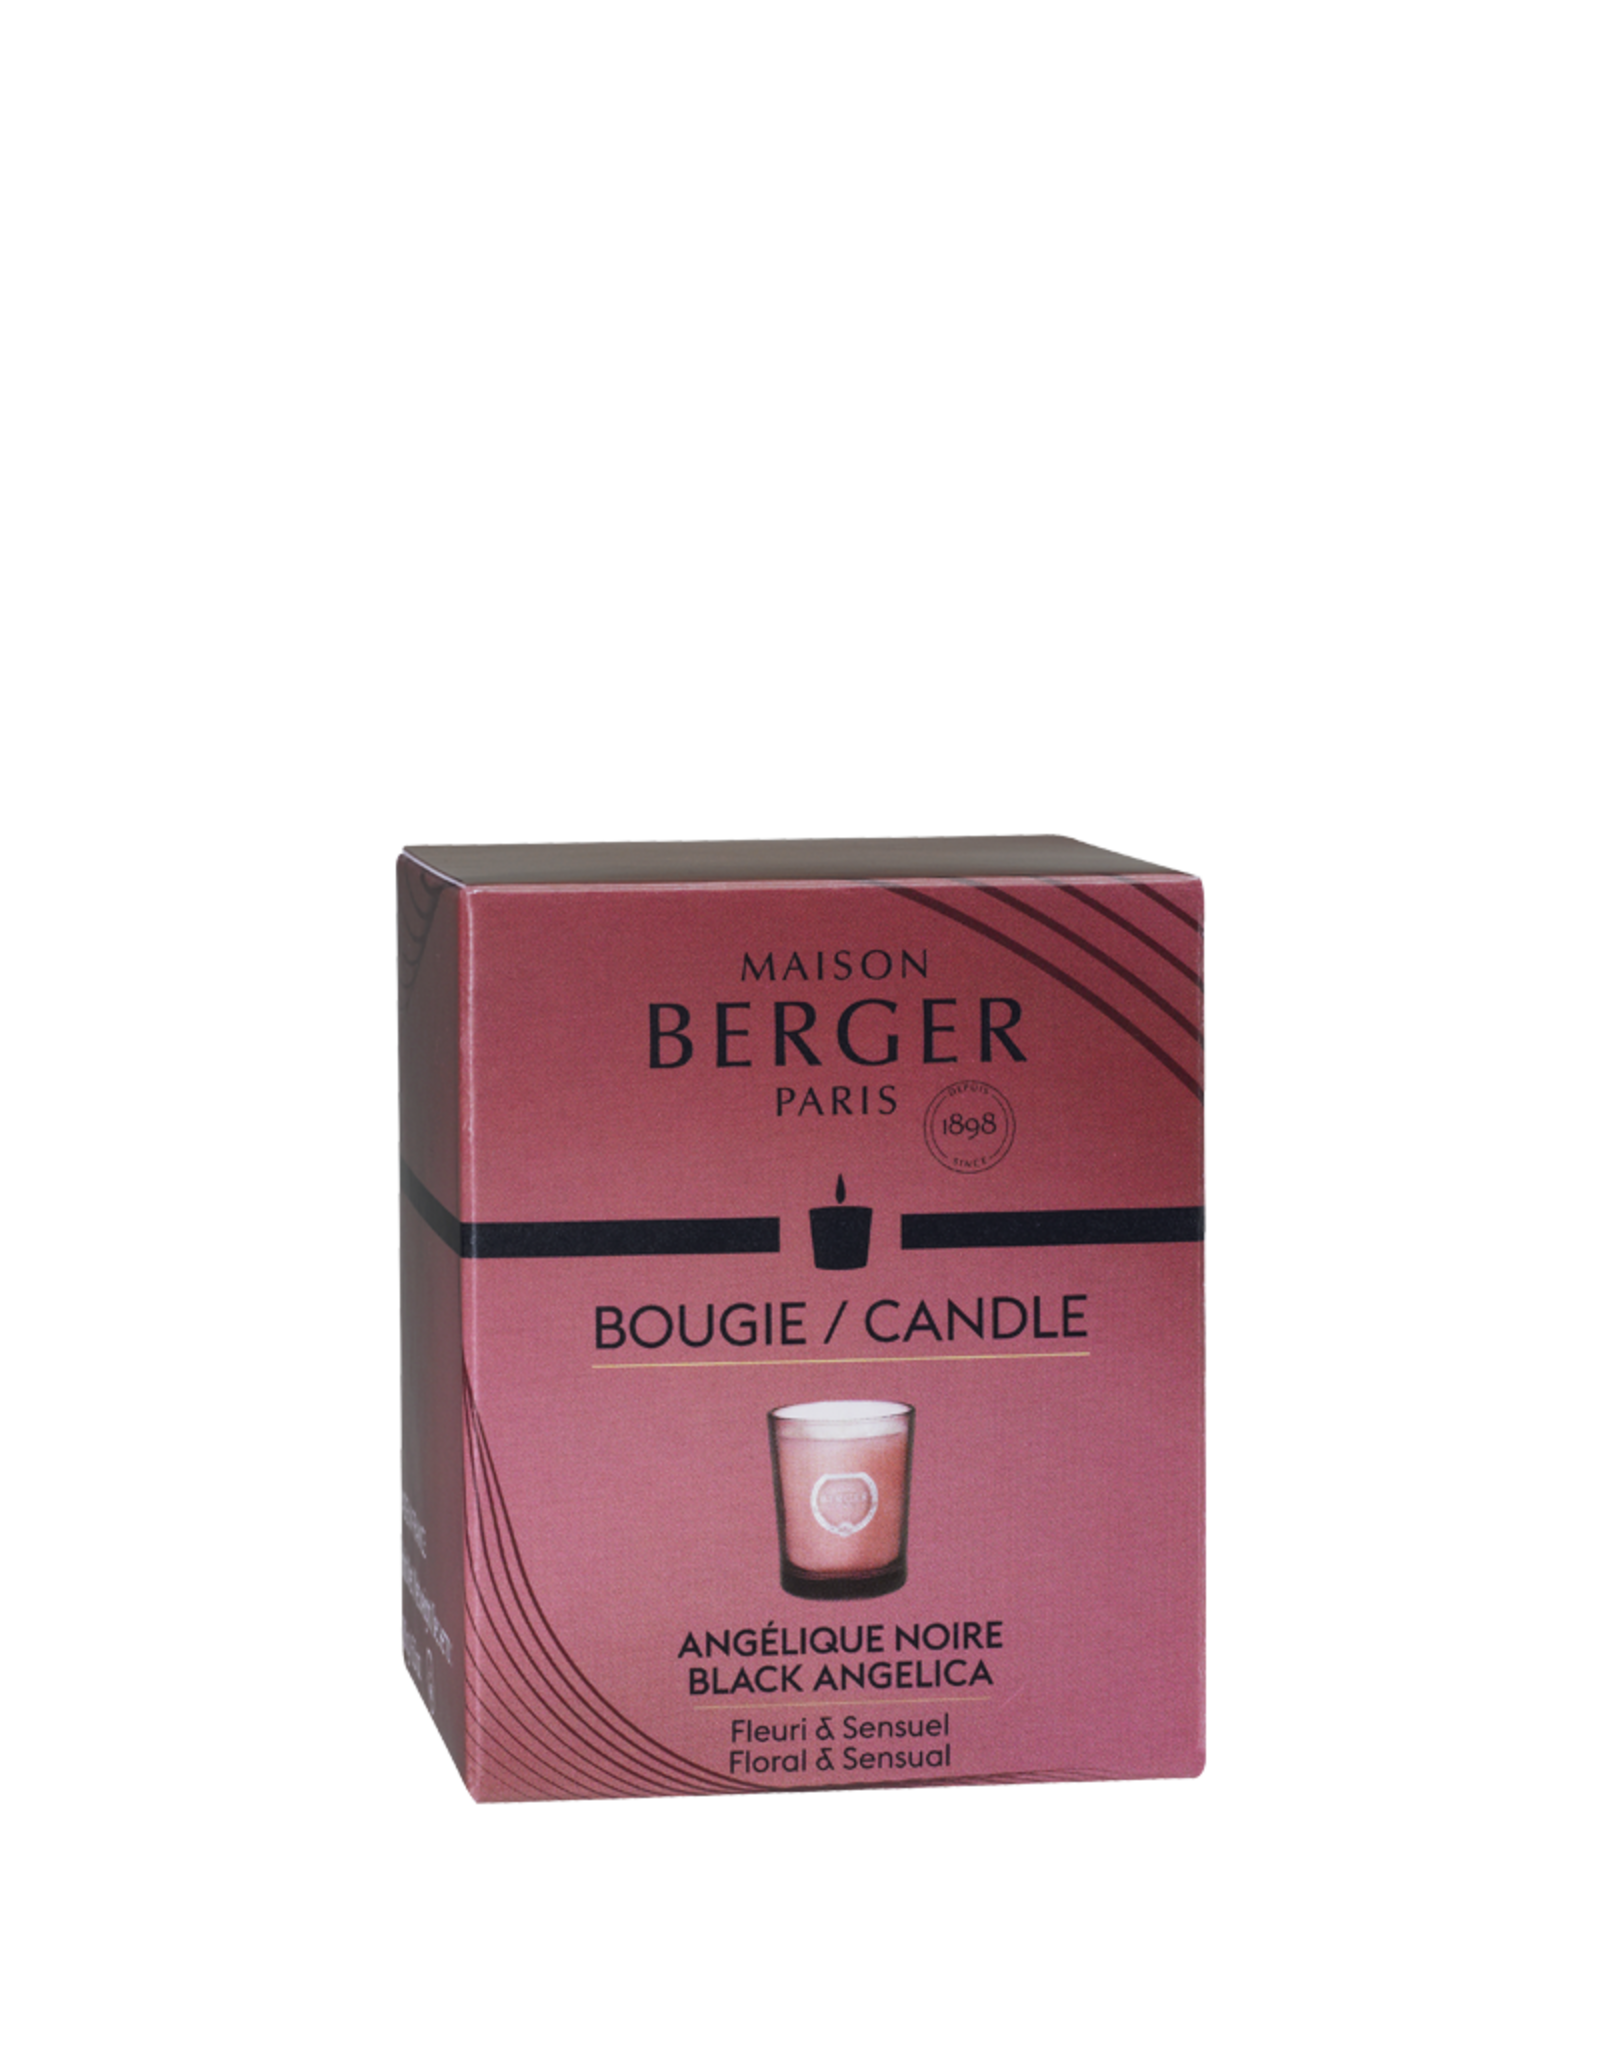 Maison Berger Bougie 6.3 Oz Black Angelica Scented Candle